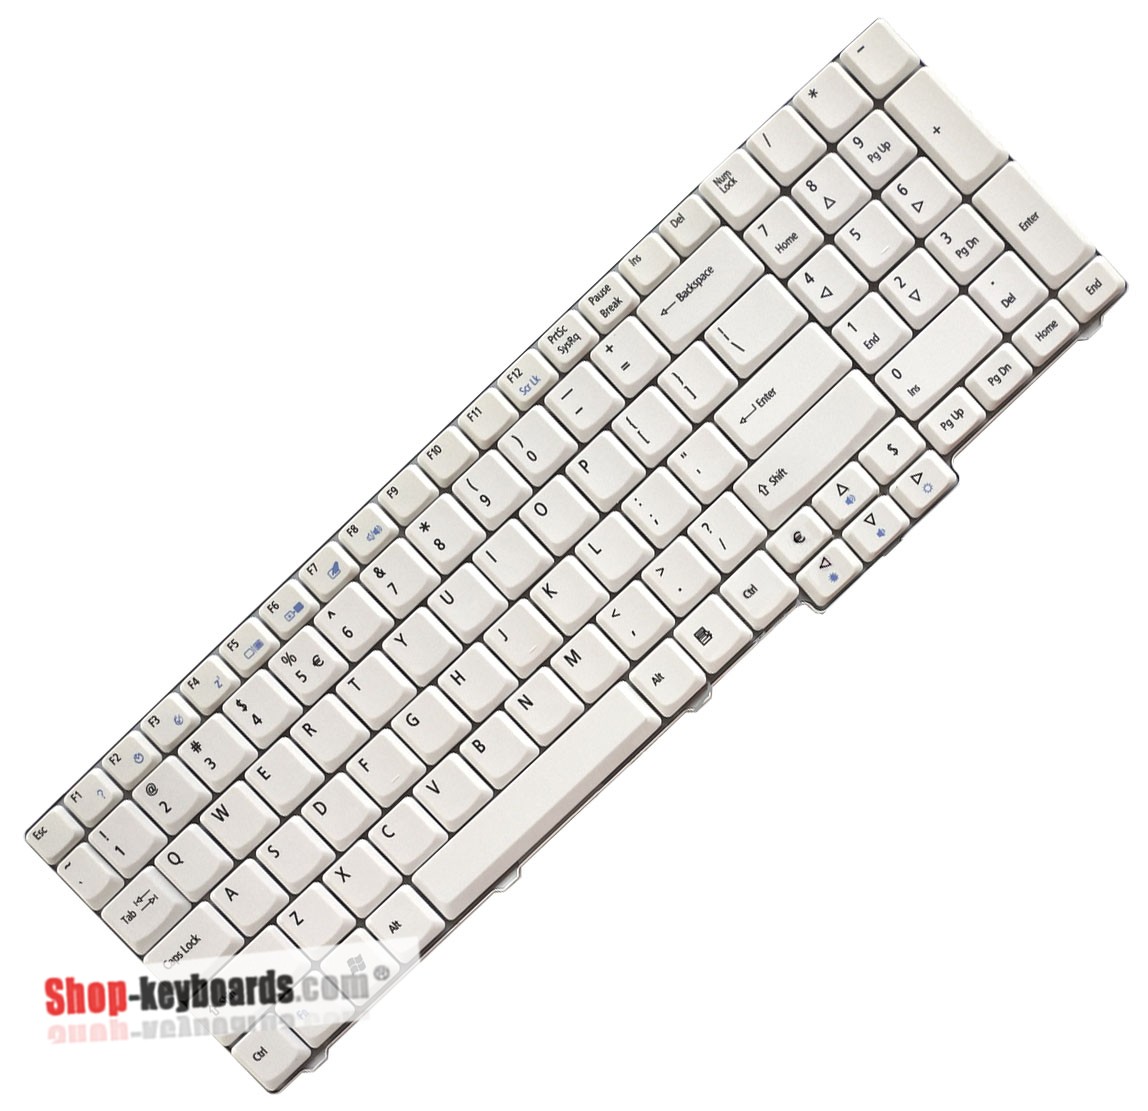 Acer Aspire 6930-6067  Keyboard replacement